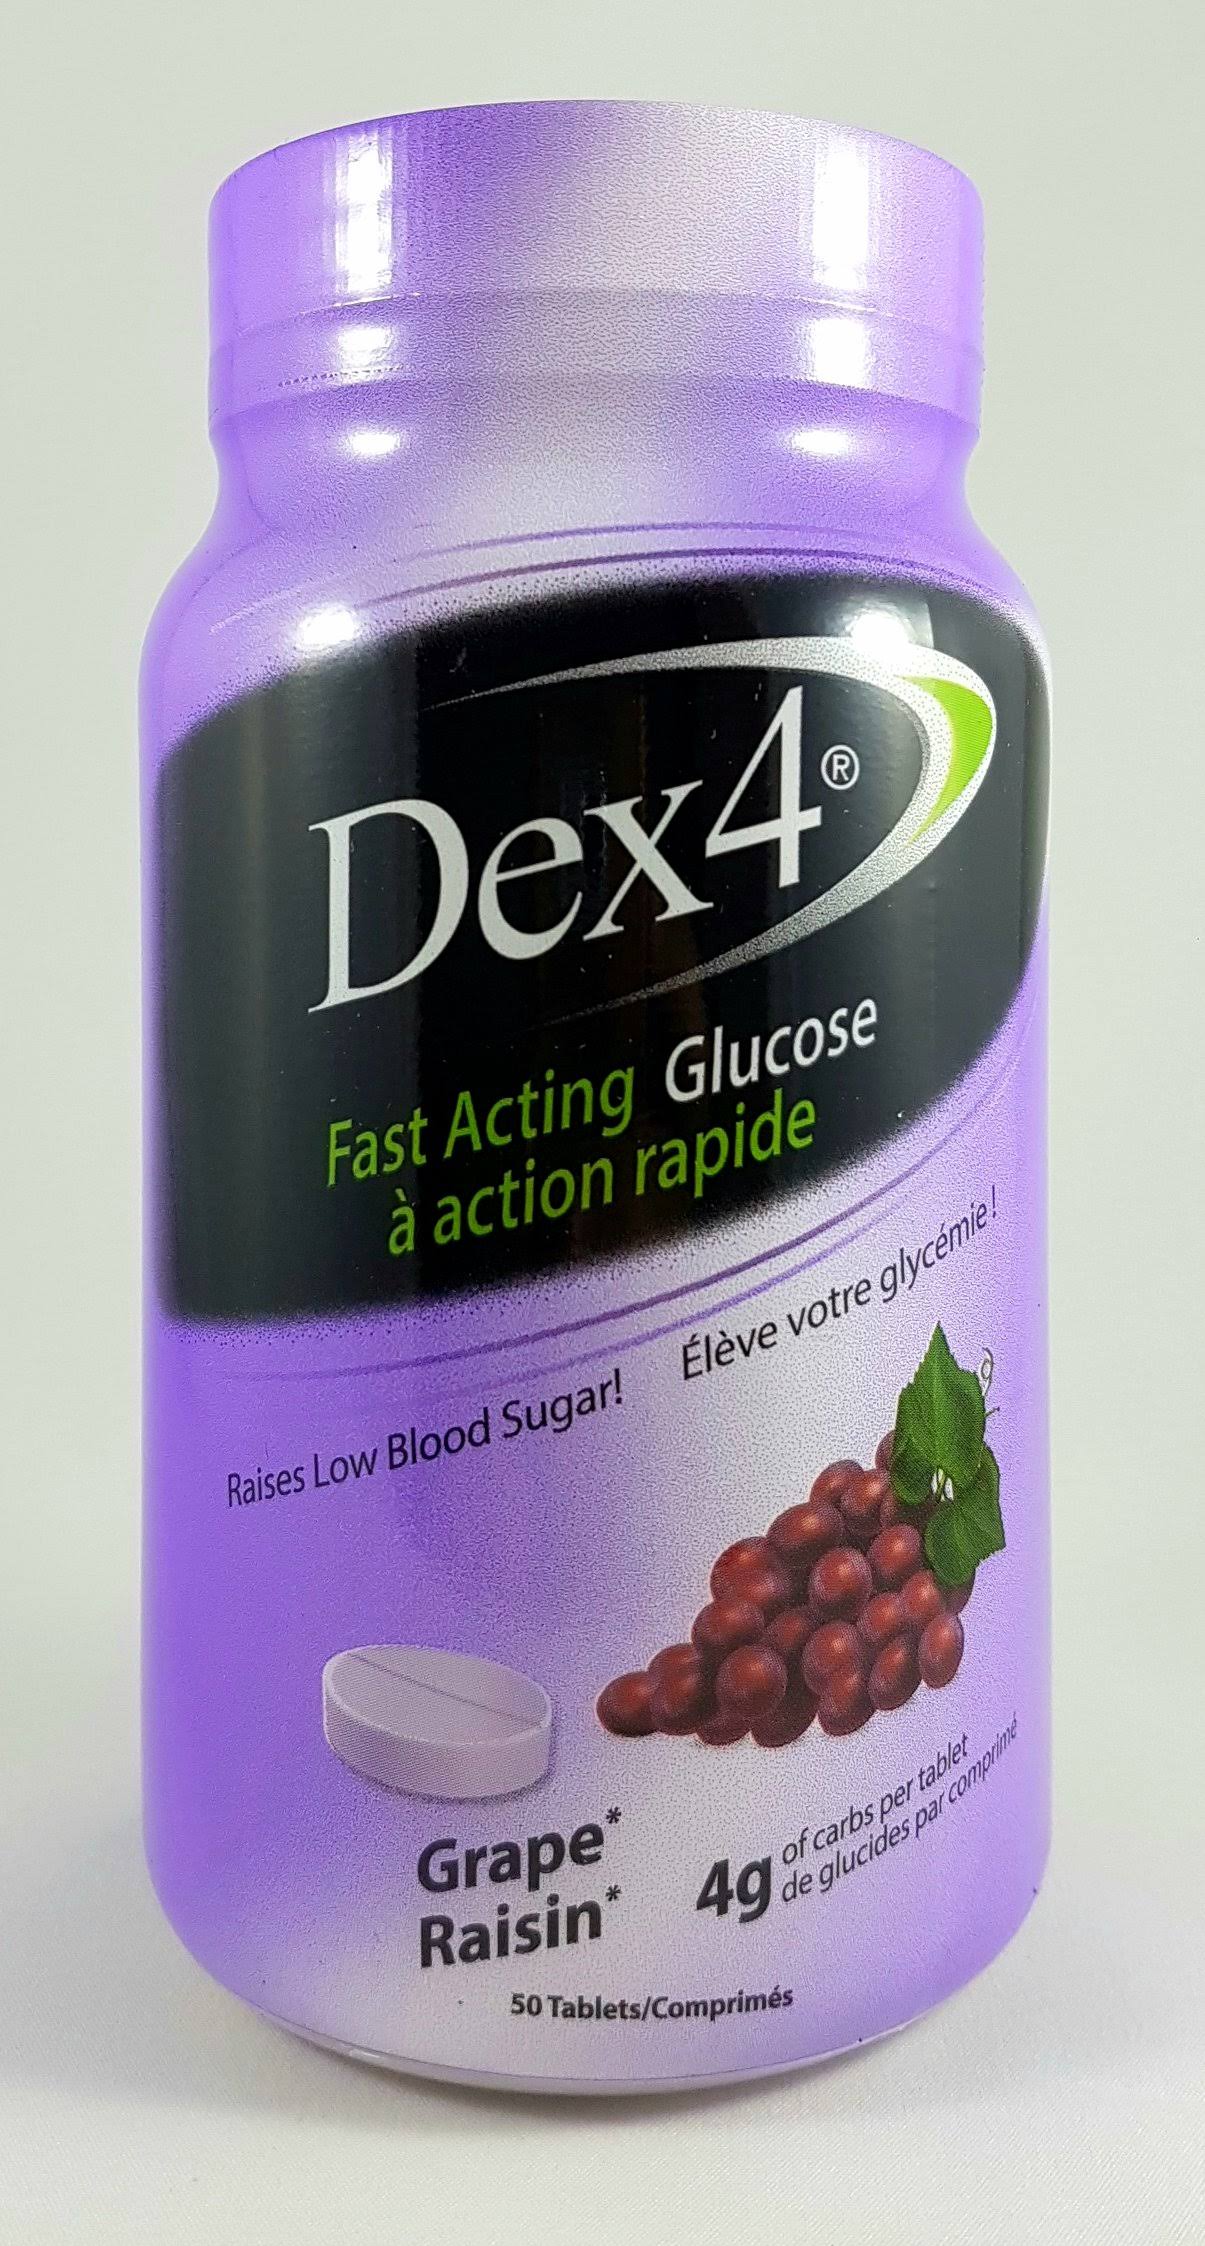 Dex4 Fast-Acting Glucose Tablets - Grape, 50 Tablets